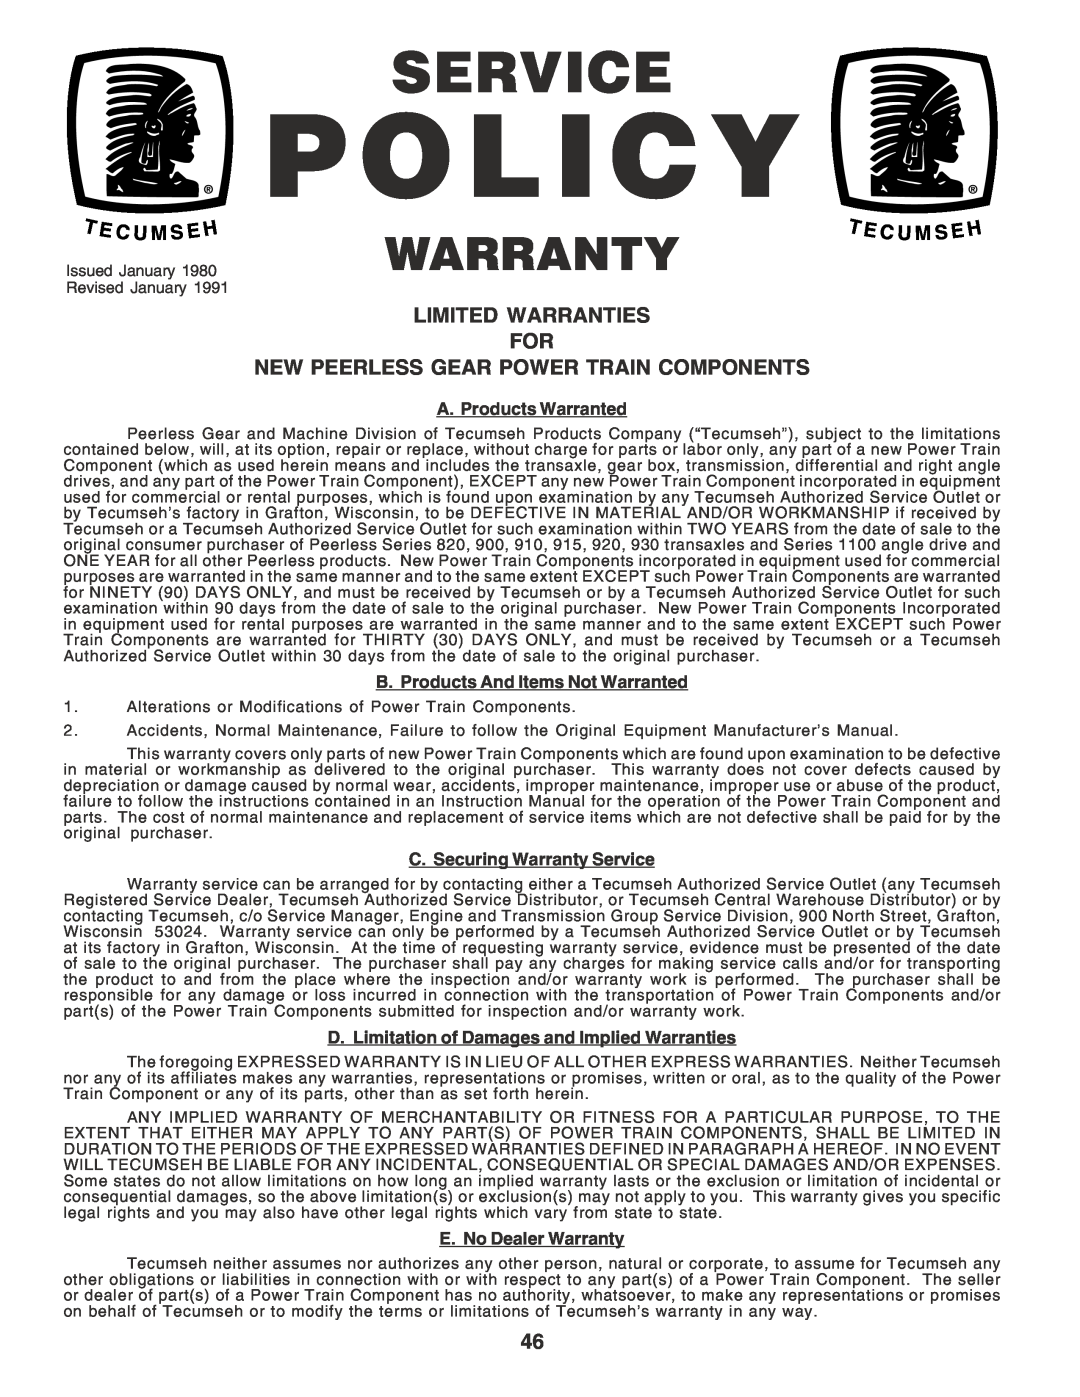 Poulan PO1538B Limited Warranties For New Peerless Gear Power Train Components, Policy, Service, Warranty, T E C U M Seh 